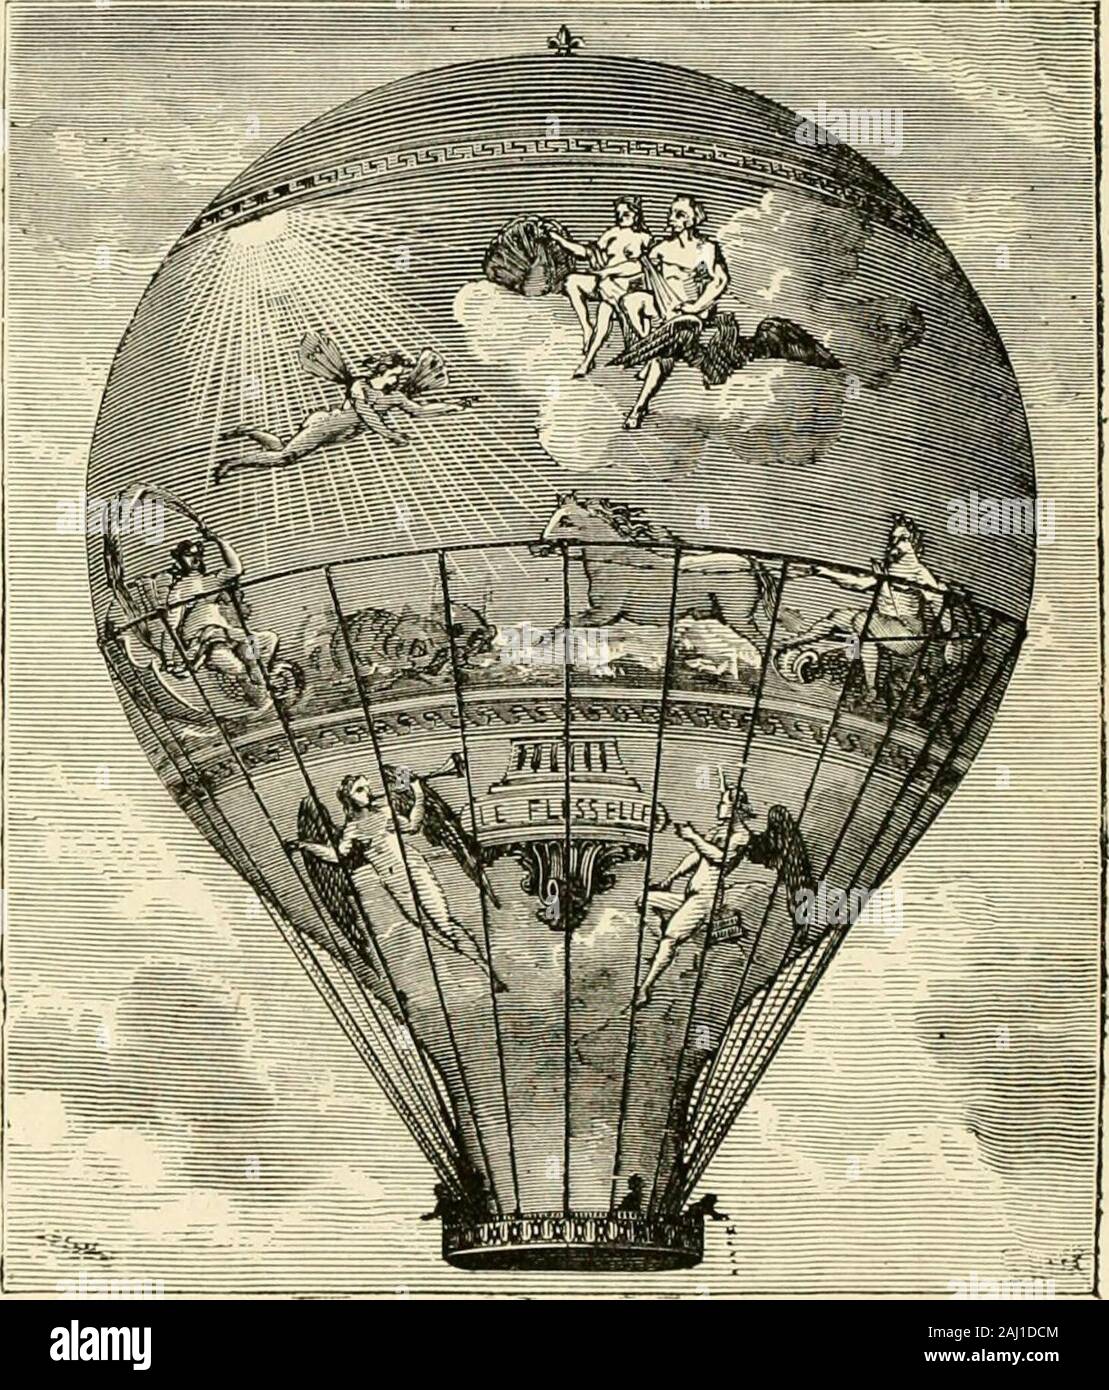 Wonderful ballon ascents : or, The conquest of the skies A history of balloons and balloon voyages . ey were in the gayest humour, and they calcu-lated that the fuel they had would keep them floating tilllate in the evening. Unfortunately, however, after throwingmore wood on the fire, in order to get up to a greater alti-tude, it was discovered that a rent had been made in thecovering, caused by the fire by which the balloon had beendamaged two or three days previously. The rent was fourfeet in length ; and as the heated air escaped very rapidlyby it, the balloon fell, after having sailed abov Stock Photo